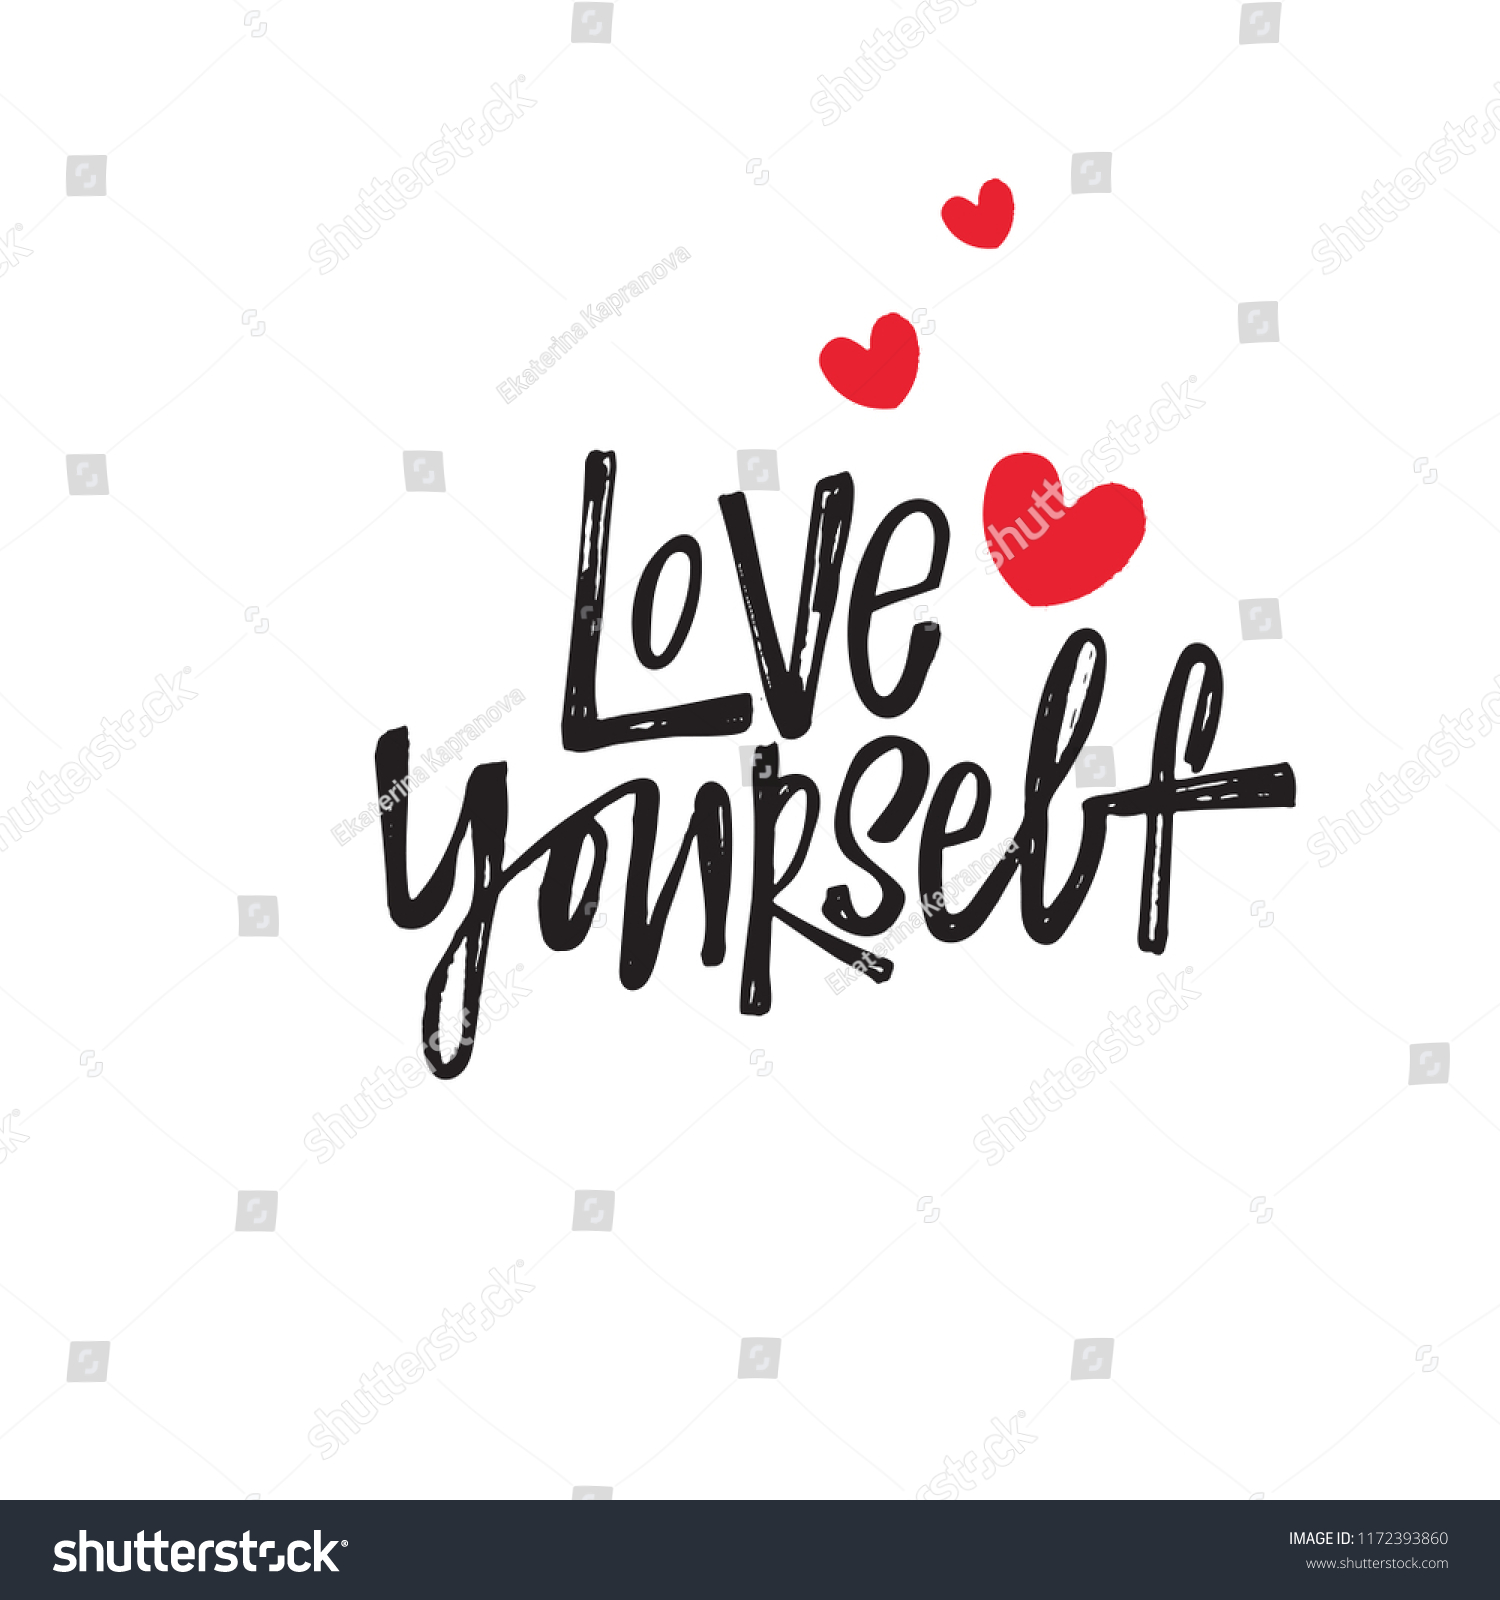 SVG of Love yourself. Hand lettering quote with illustration of heart. Motivation. svg